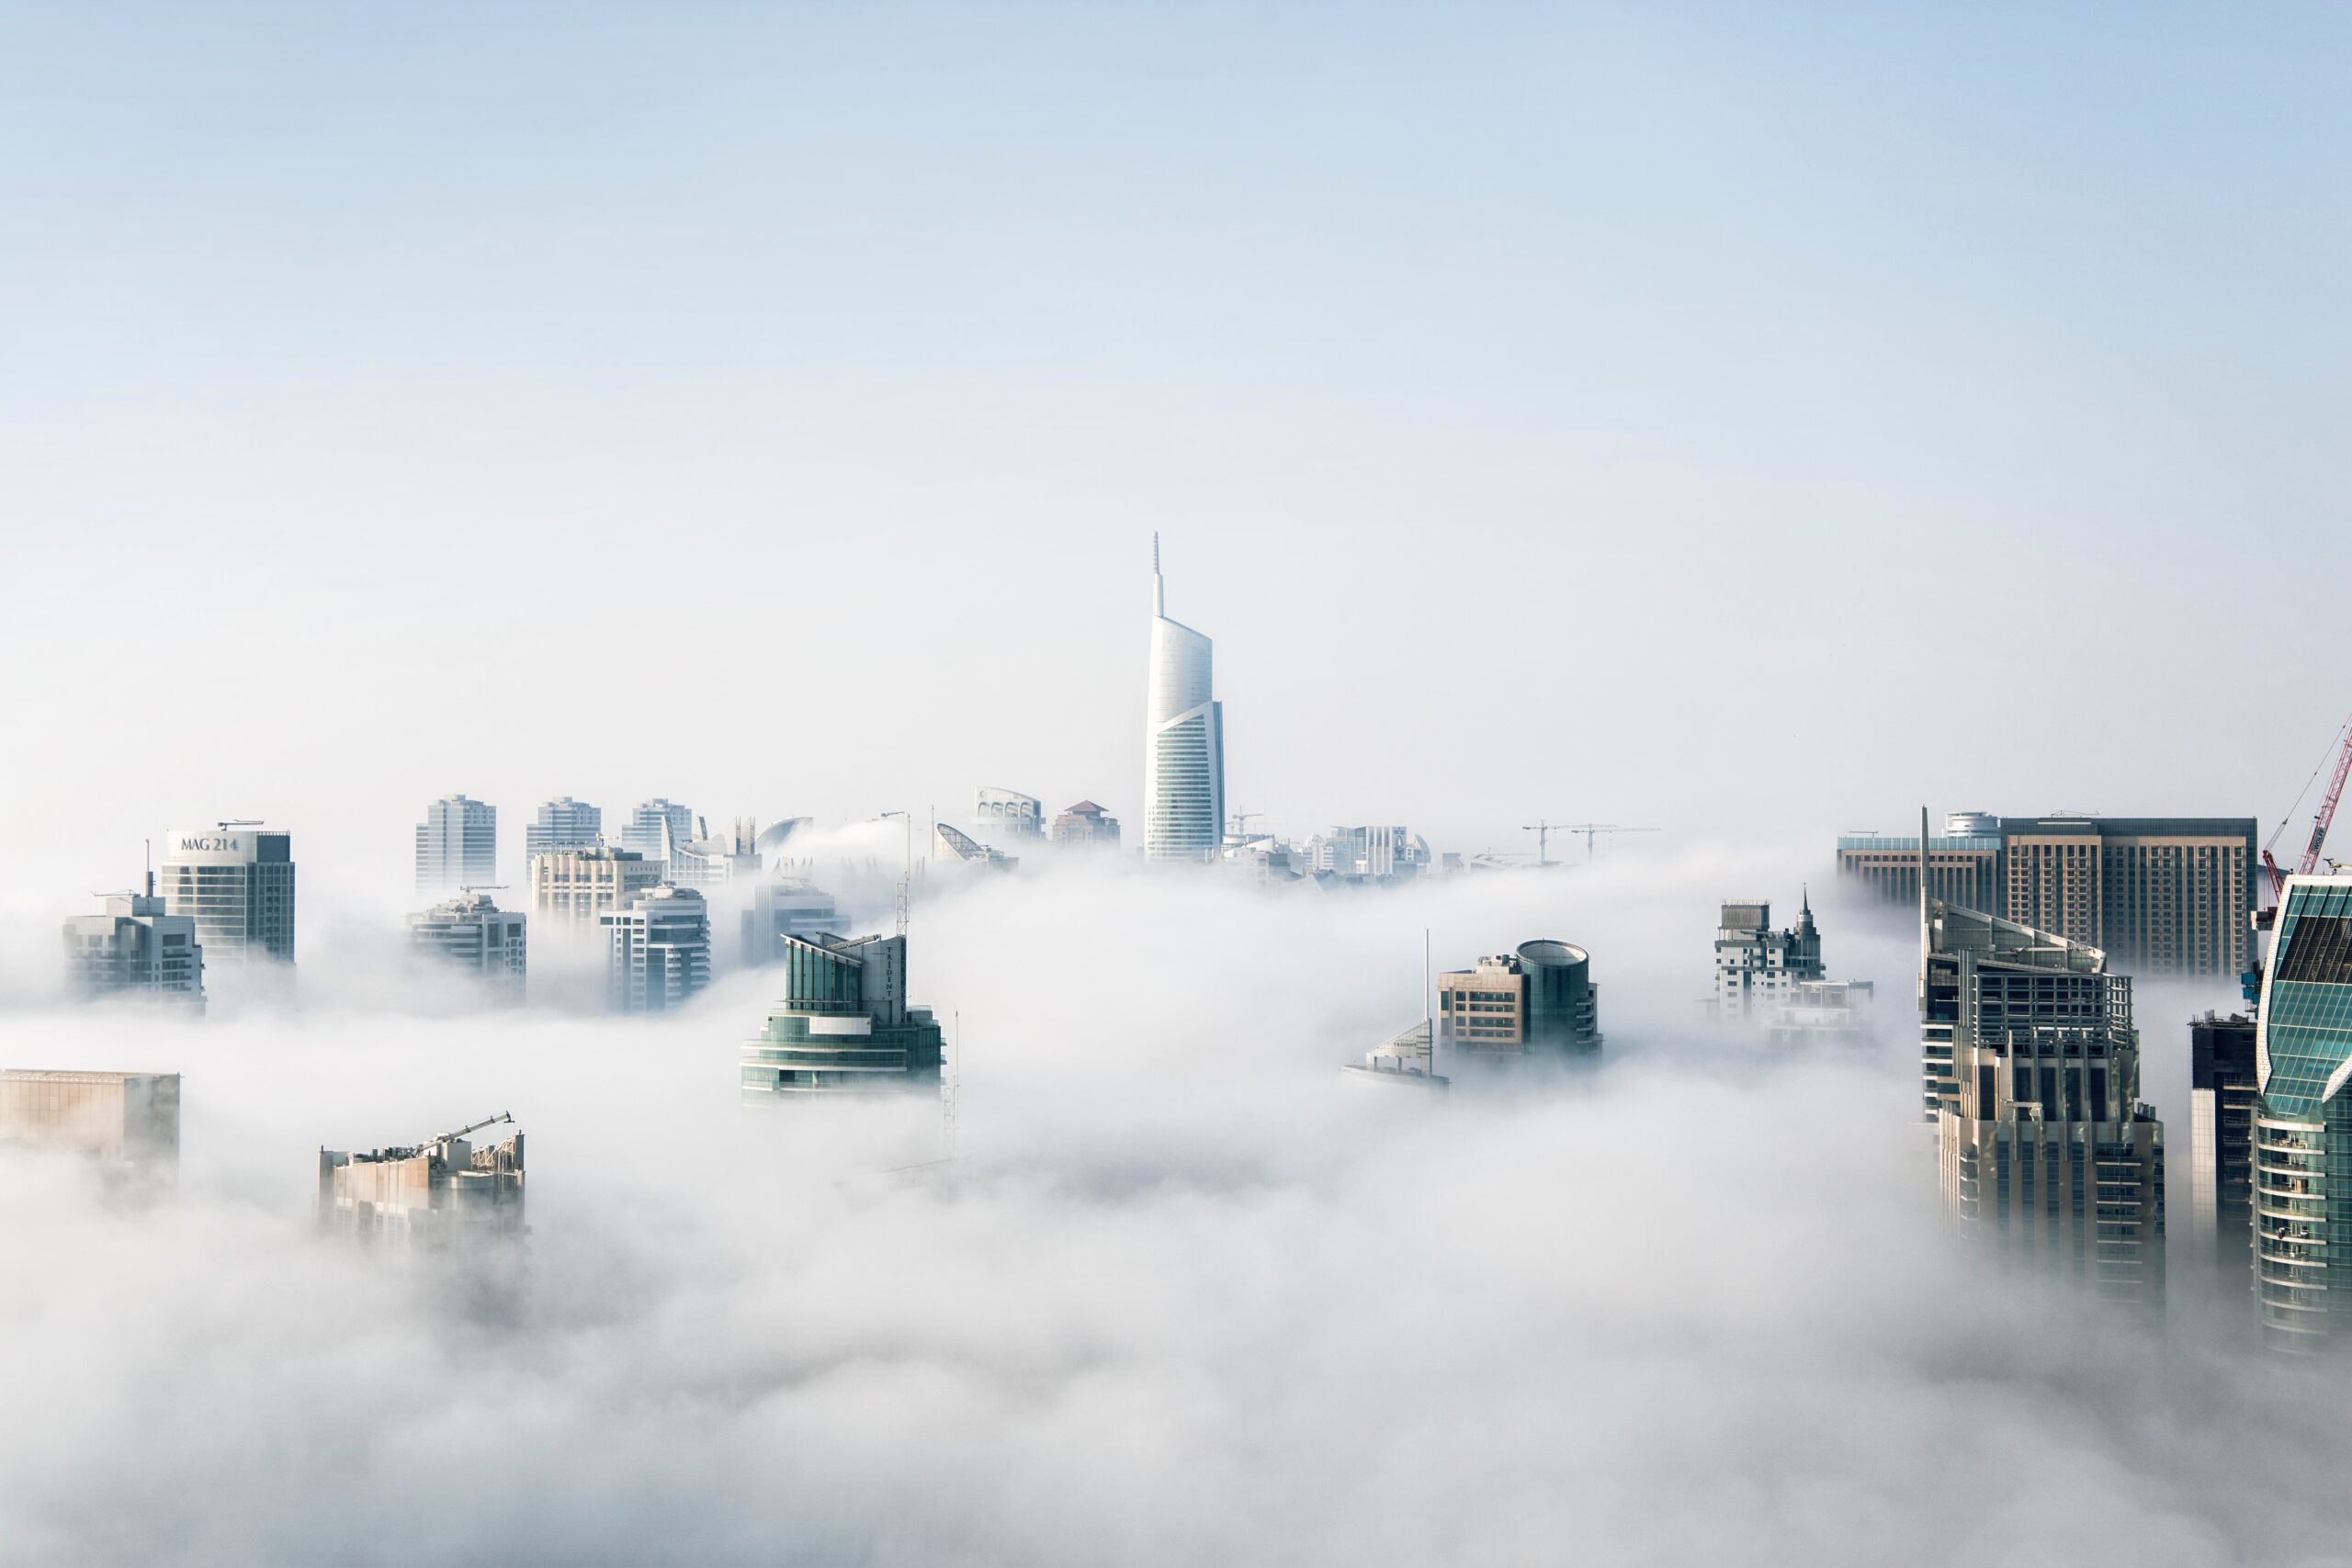 City skyline in the clouds